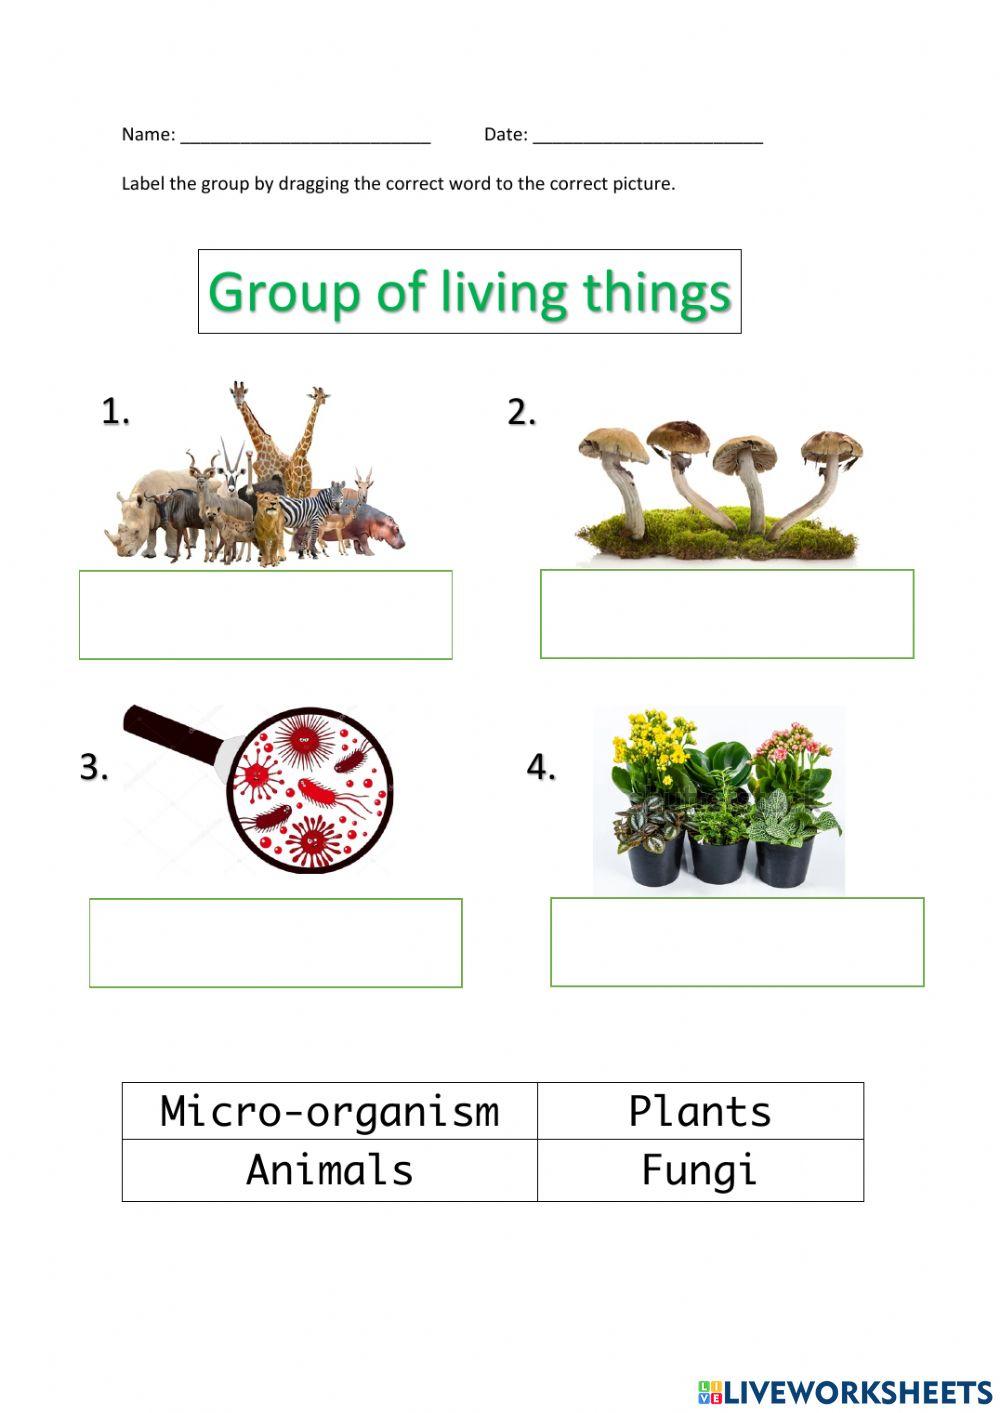 Group of living things